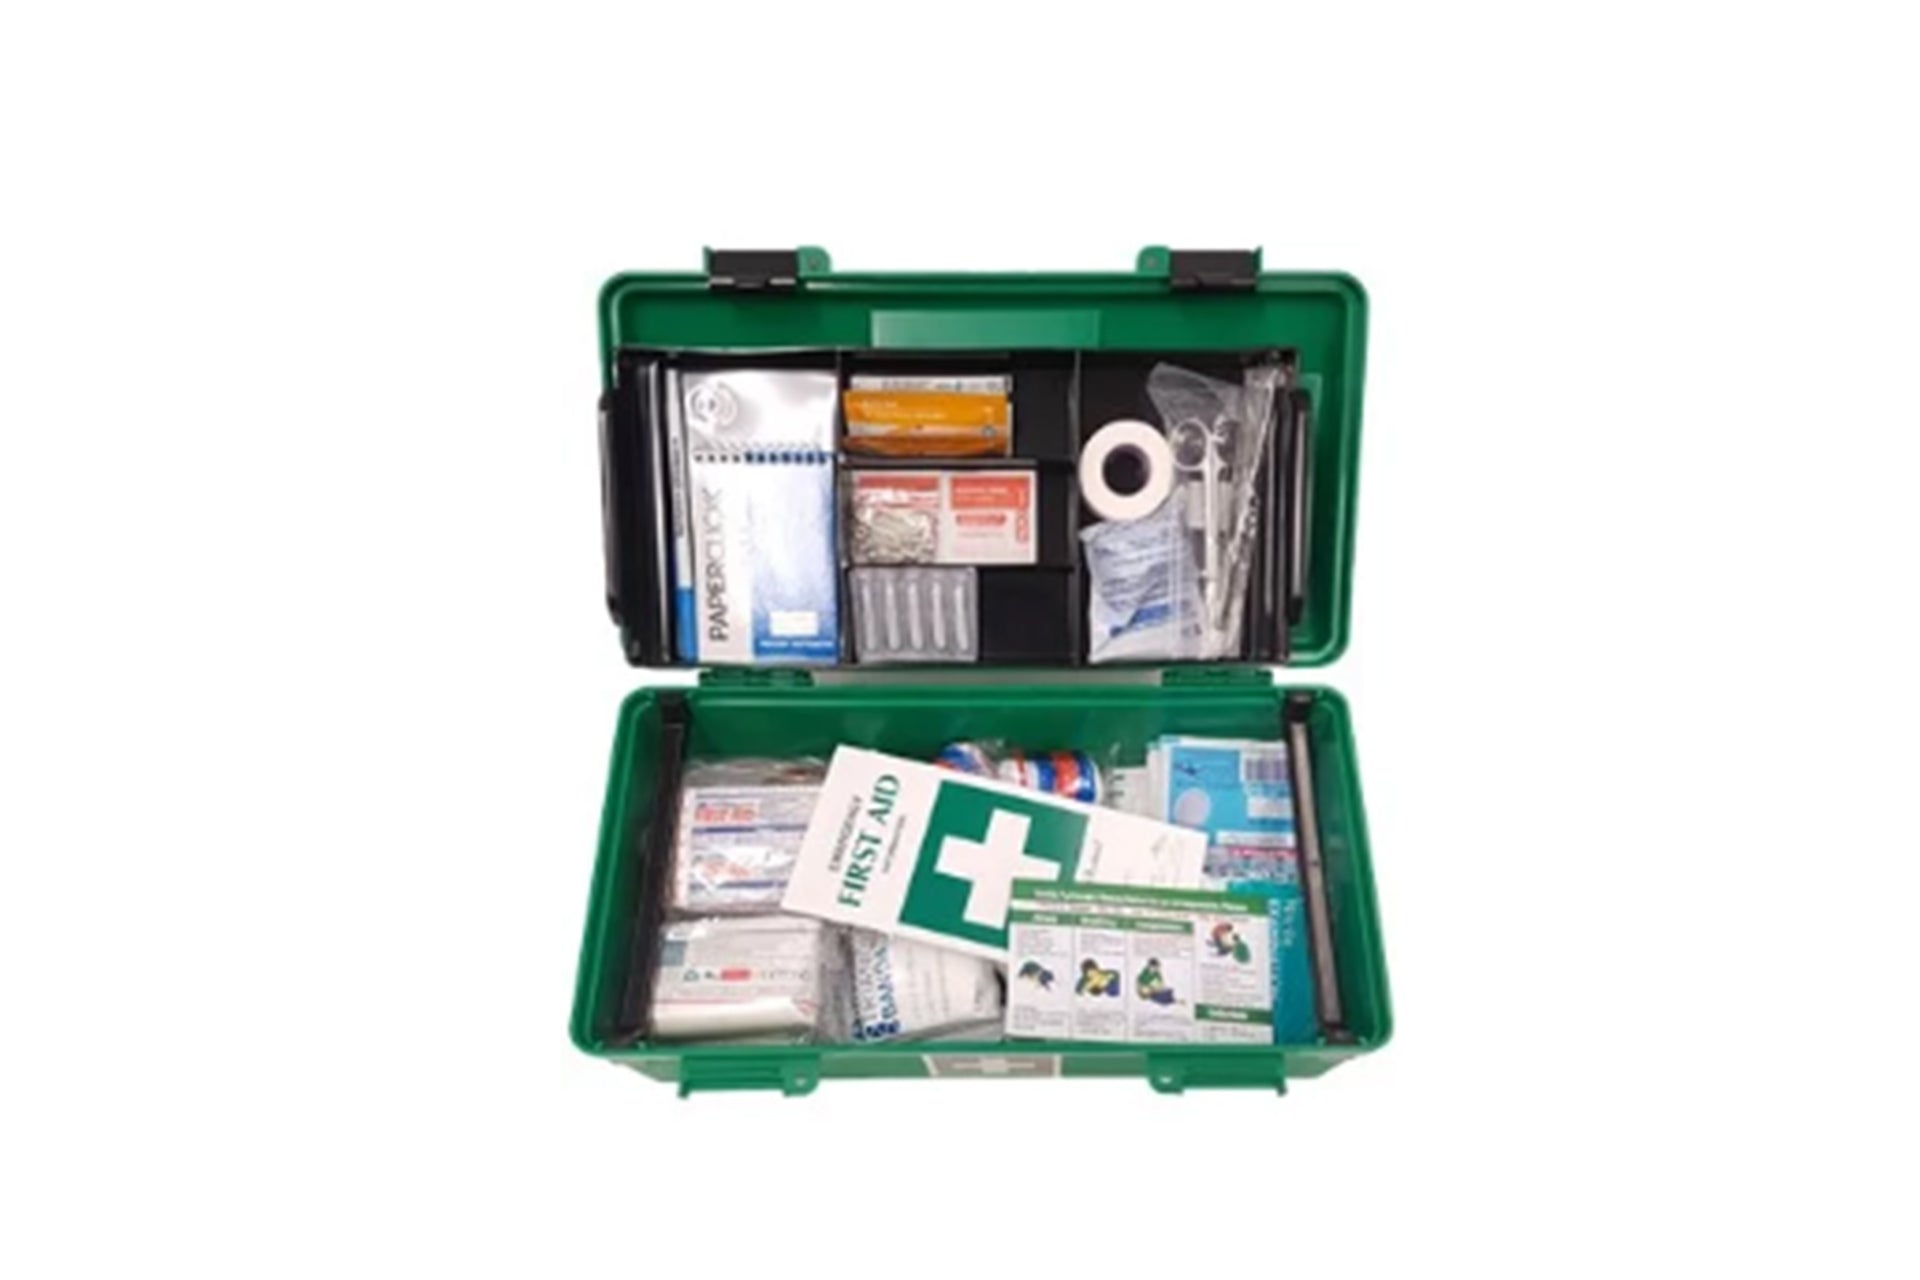 FIRST AID KIT TACKLE BOX